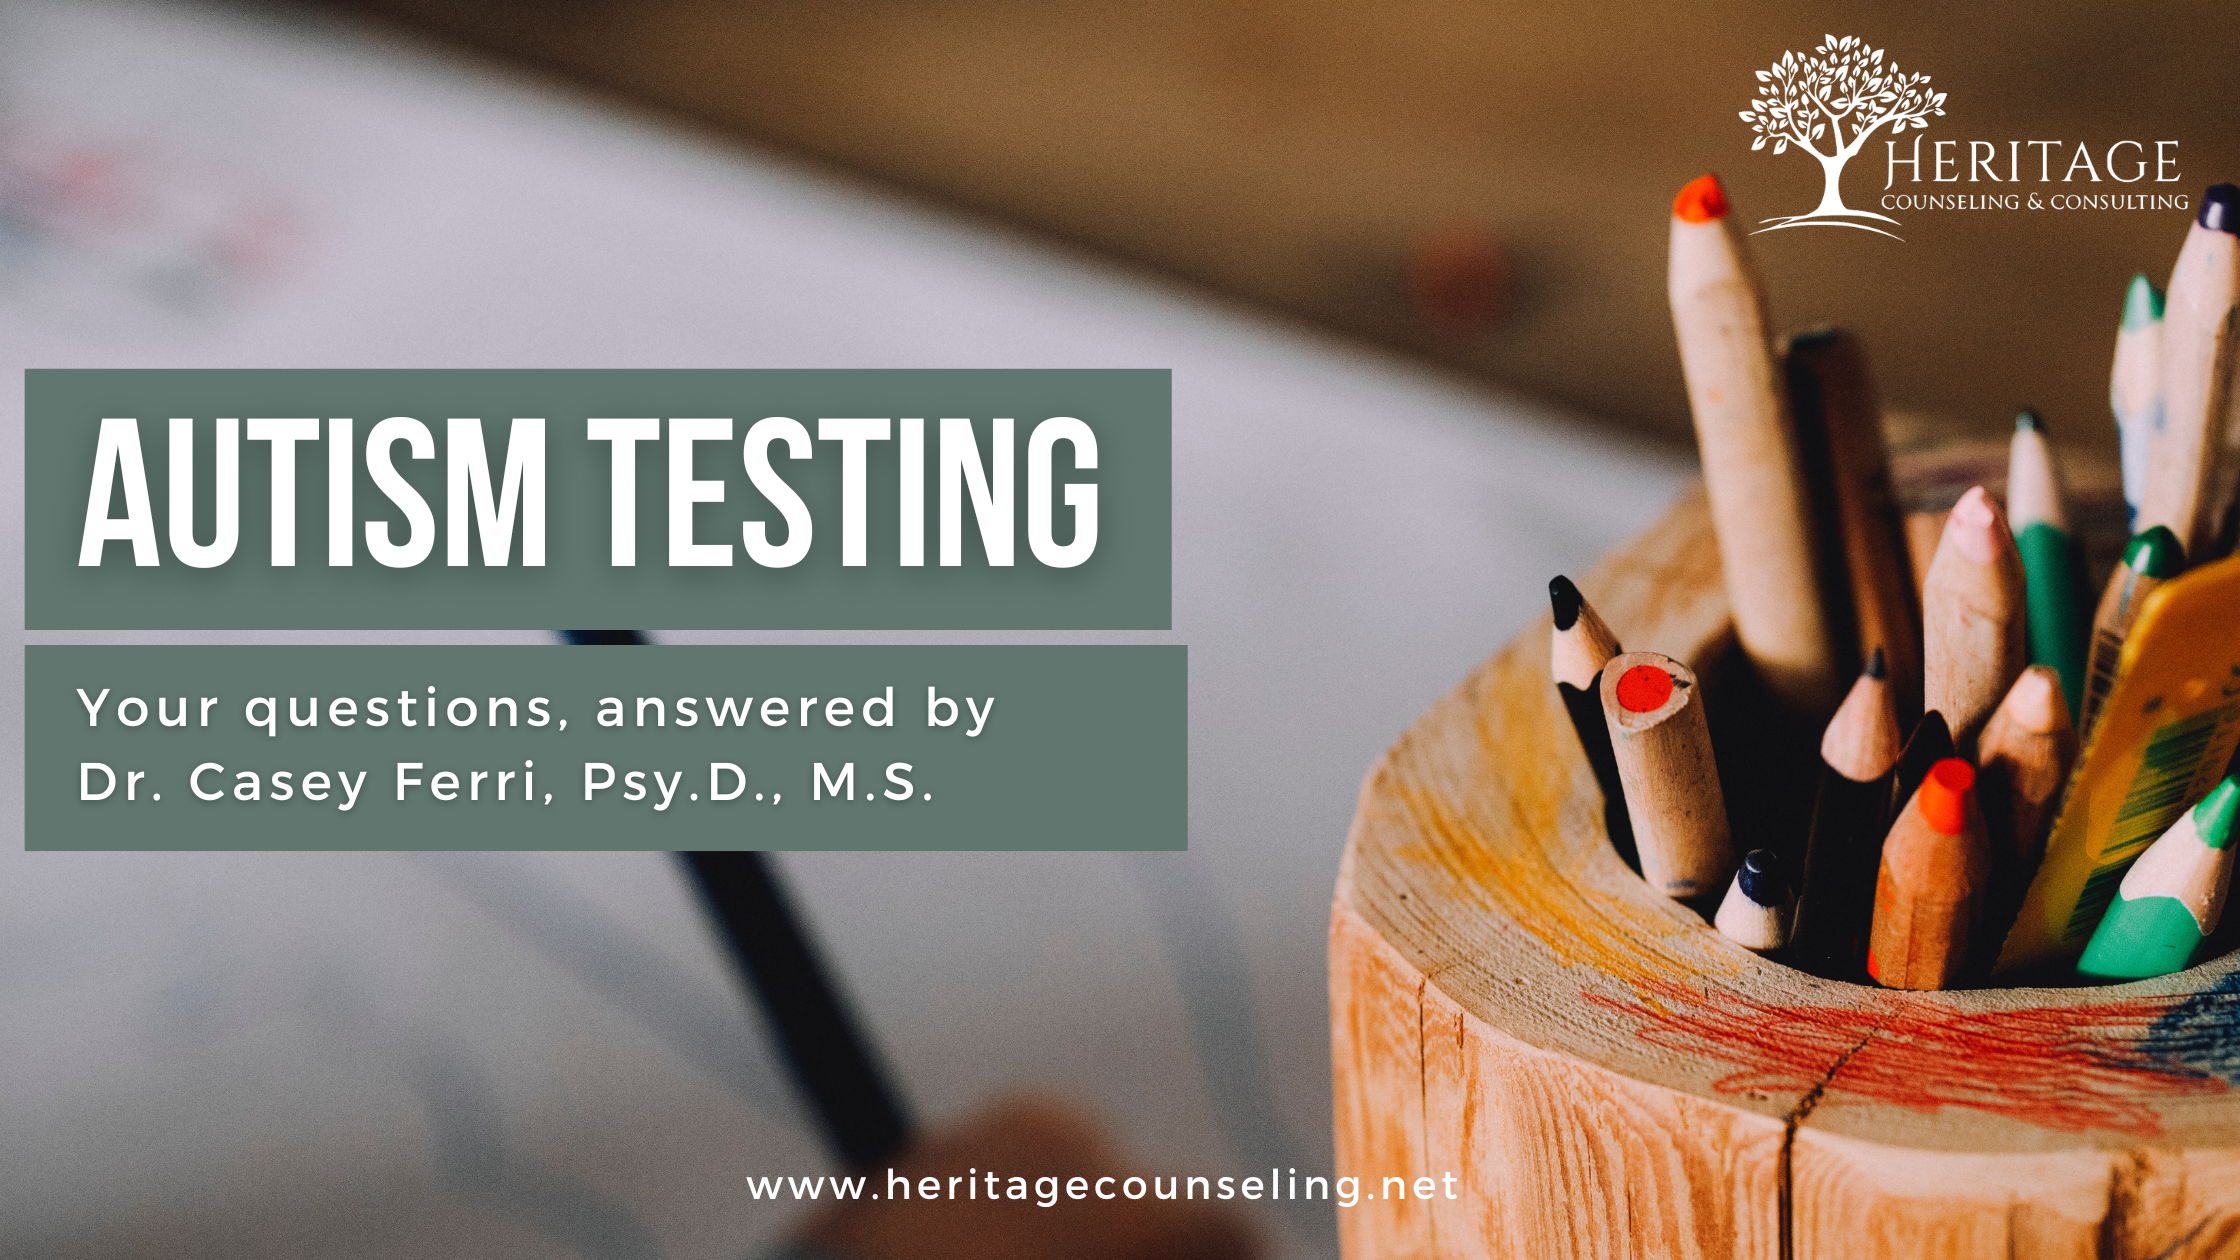 Autism Testing: Your questions answered by Dr. Casey Ferri, Psy.D., M.S.